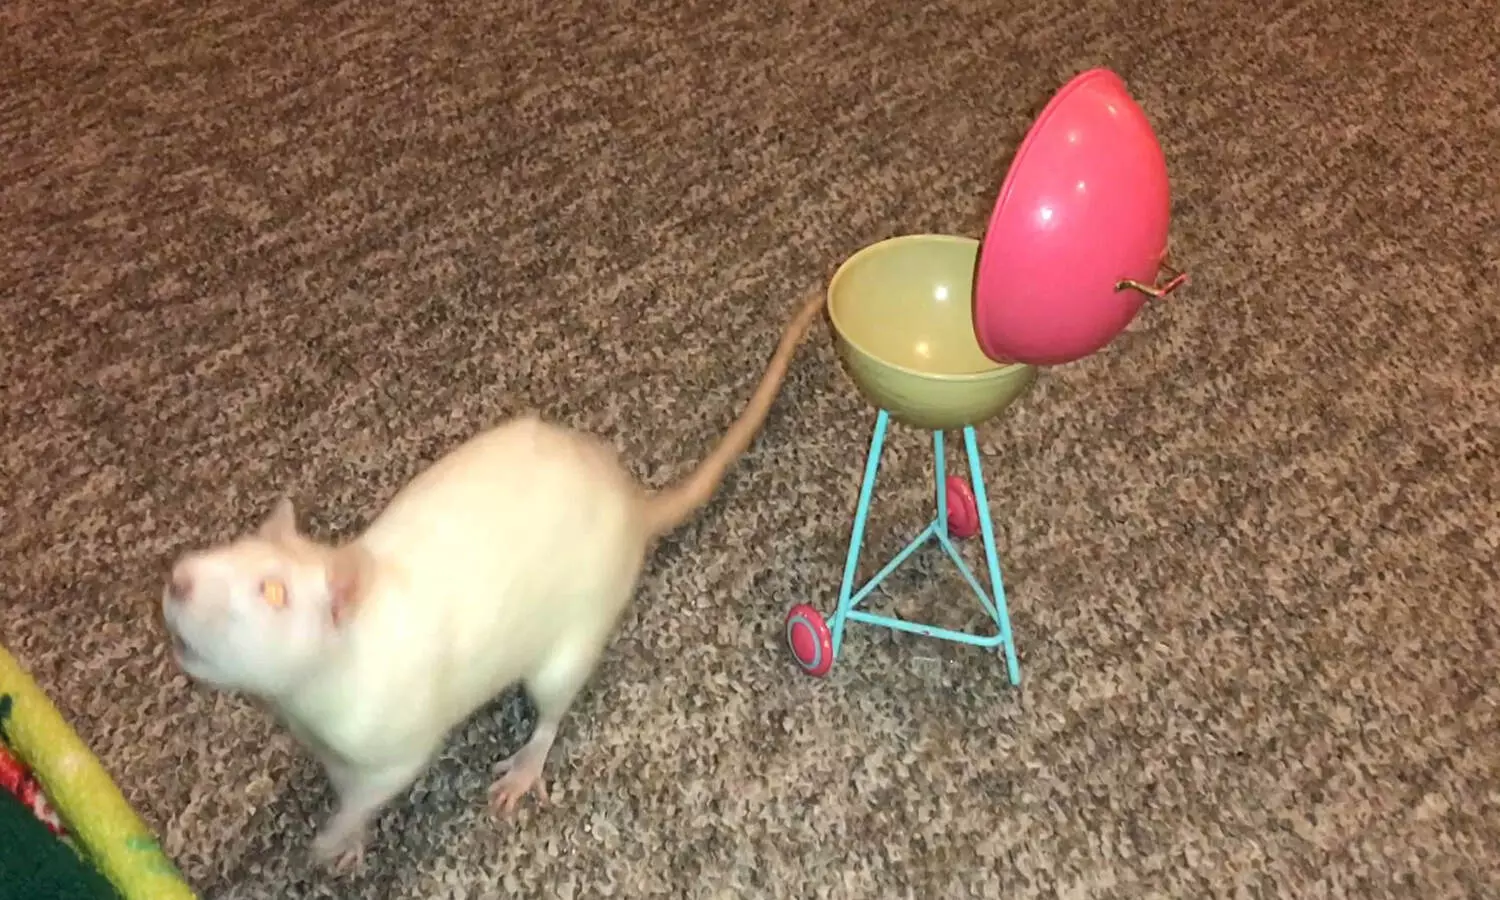 Little white rat learns to place a ball inside toy barbeque; video leaves everyone in splits